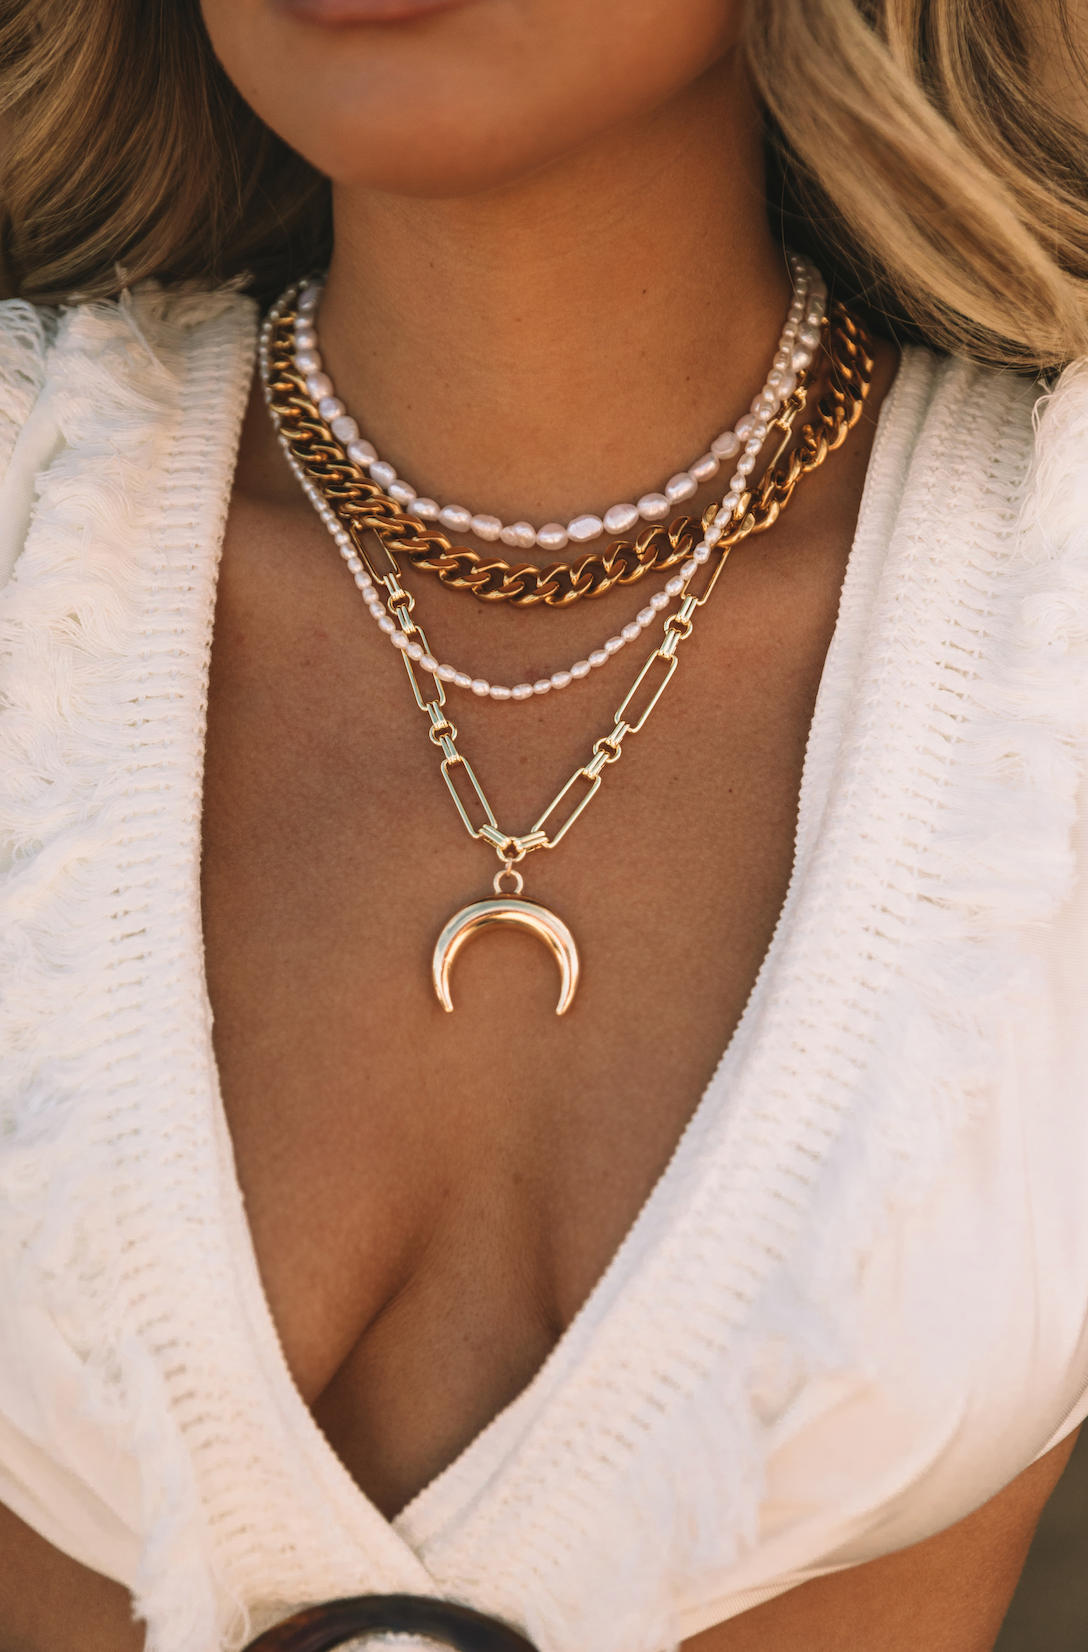 The Festival Horn Necklace